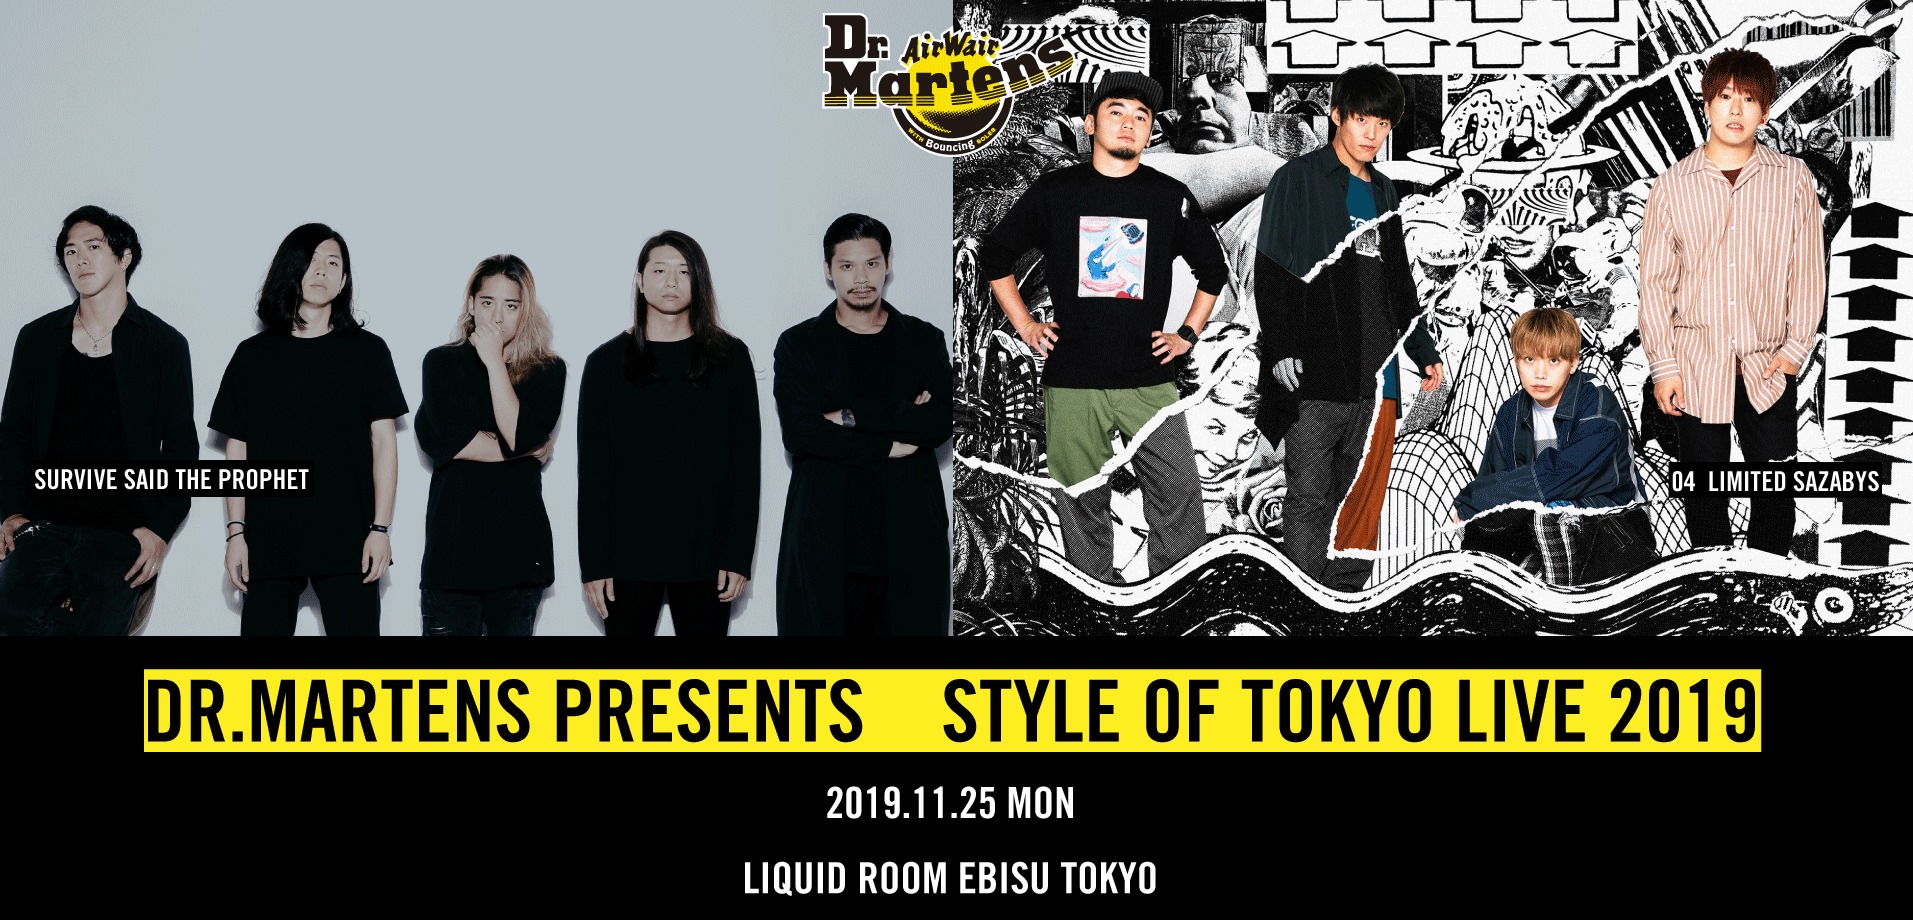 『DR.MARTENS presents STYLE of TOKYO LIVE 2019』